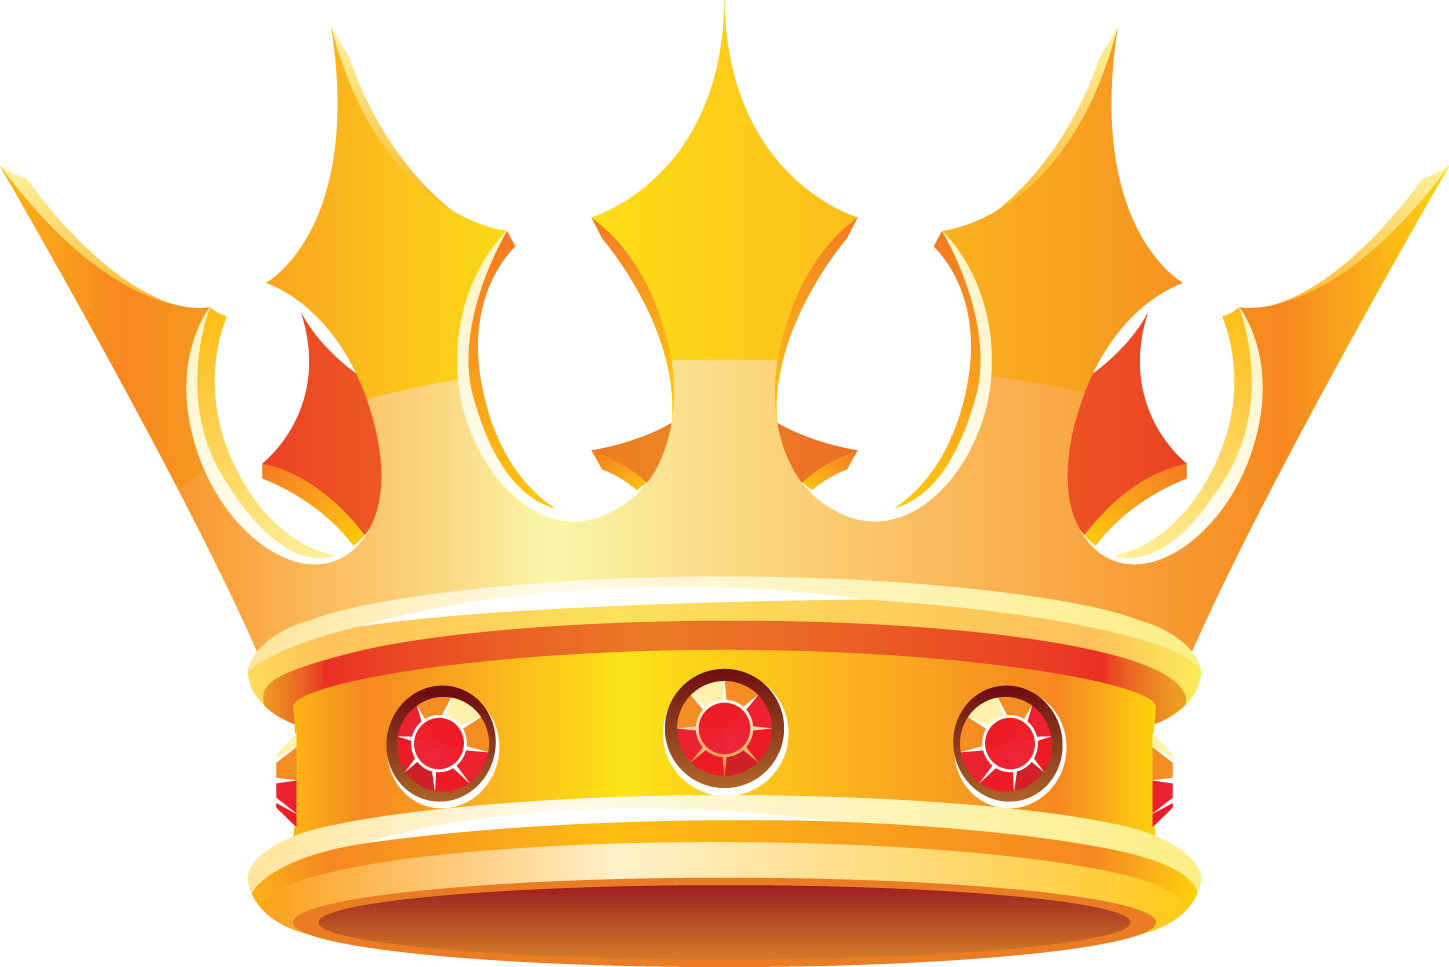 King Crown Clip Art - Clipart library